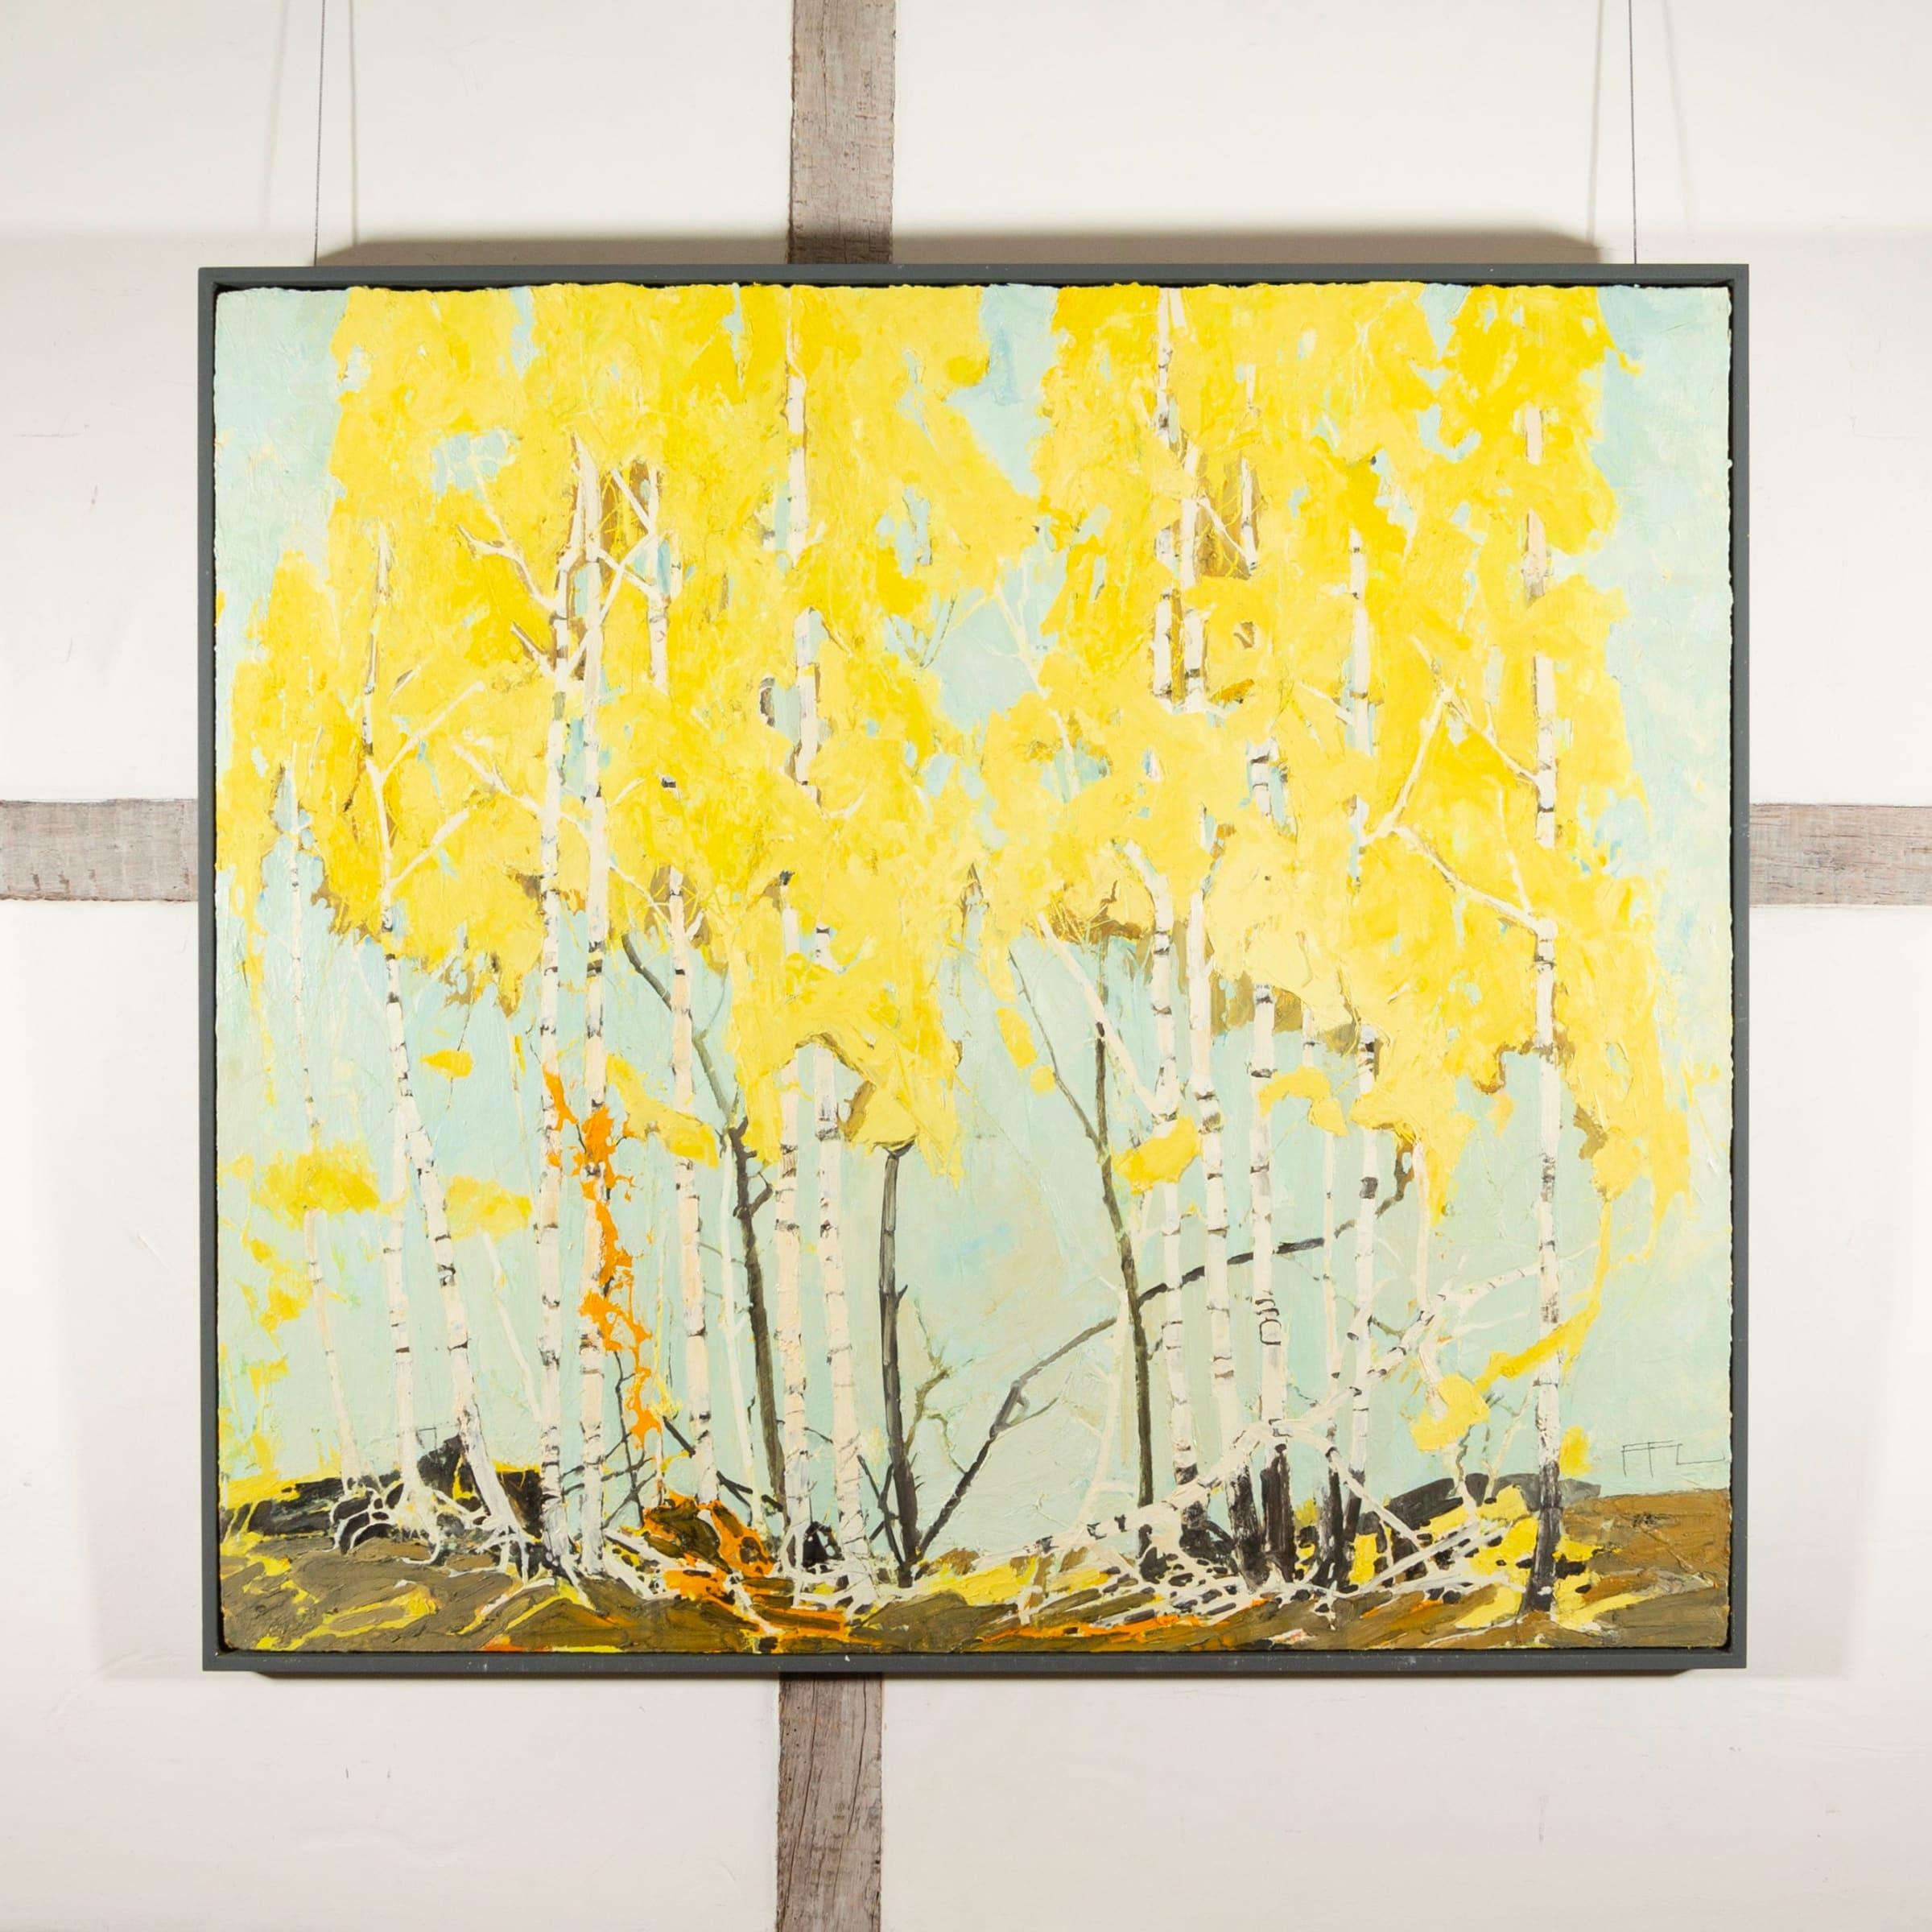 Ramble Through Golden Birch, Oil on Board Painting by Ffiona Lewis B. 1964, 2019

Additional information:
Medium: Oil on board
Dimensions: 92 x 102 cm
36 1/4 x 40 1/8 in
Signed, titled and dated

Ffiona Lewis was born in London but grew up in Devon,